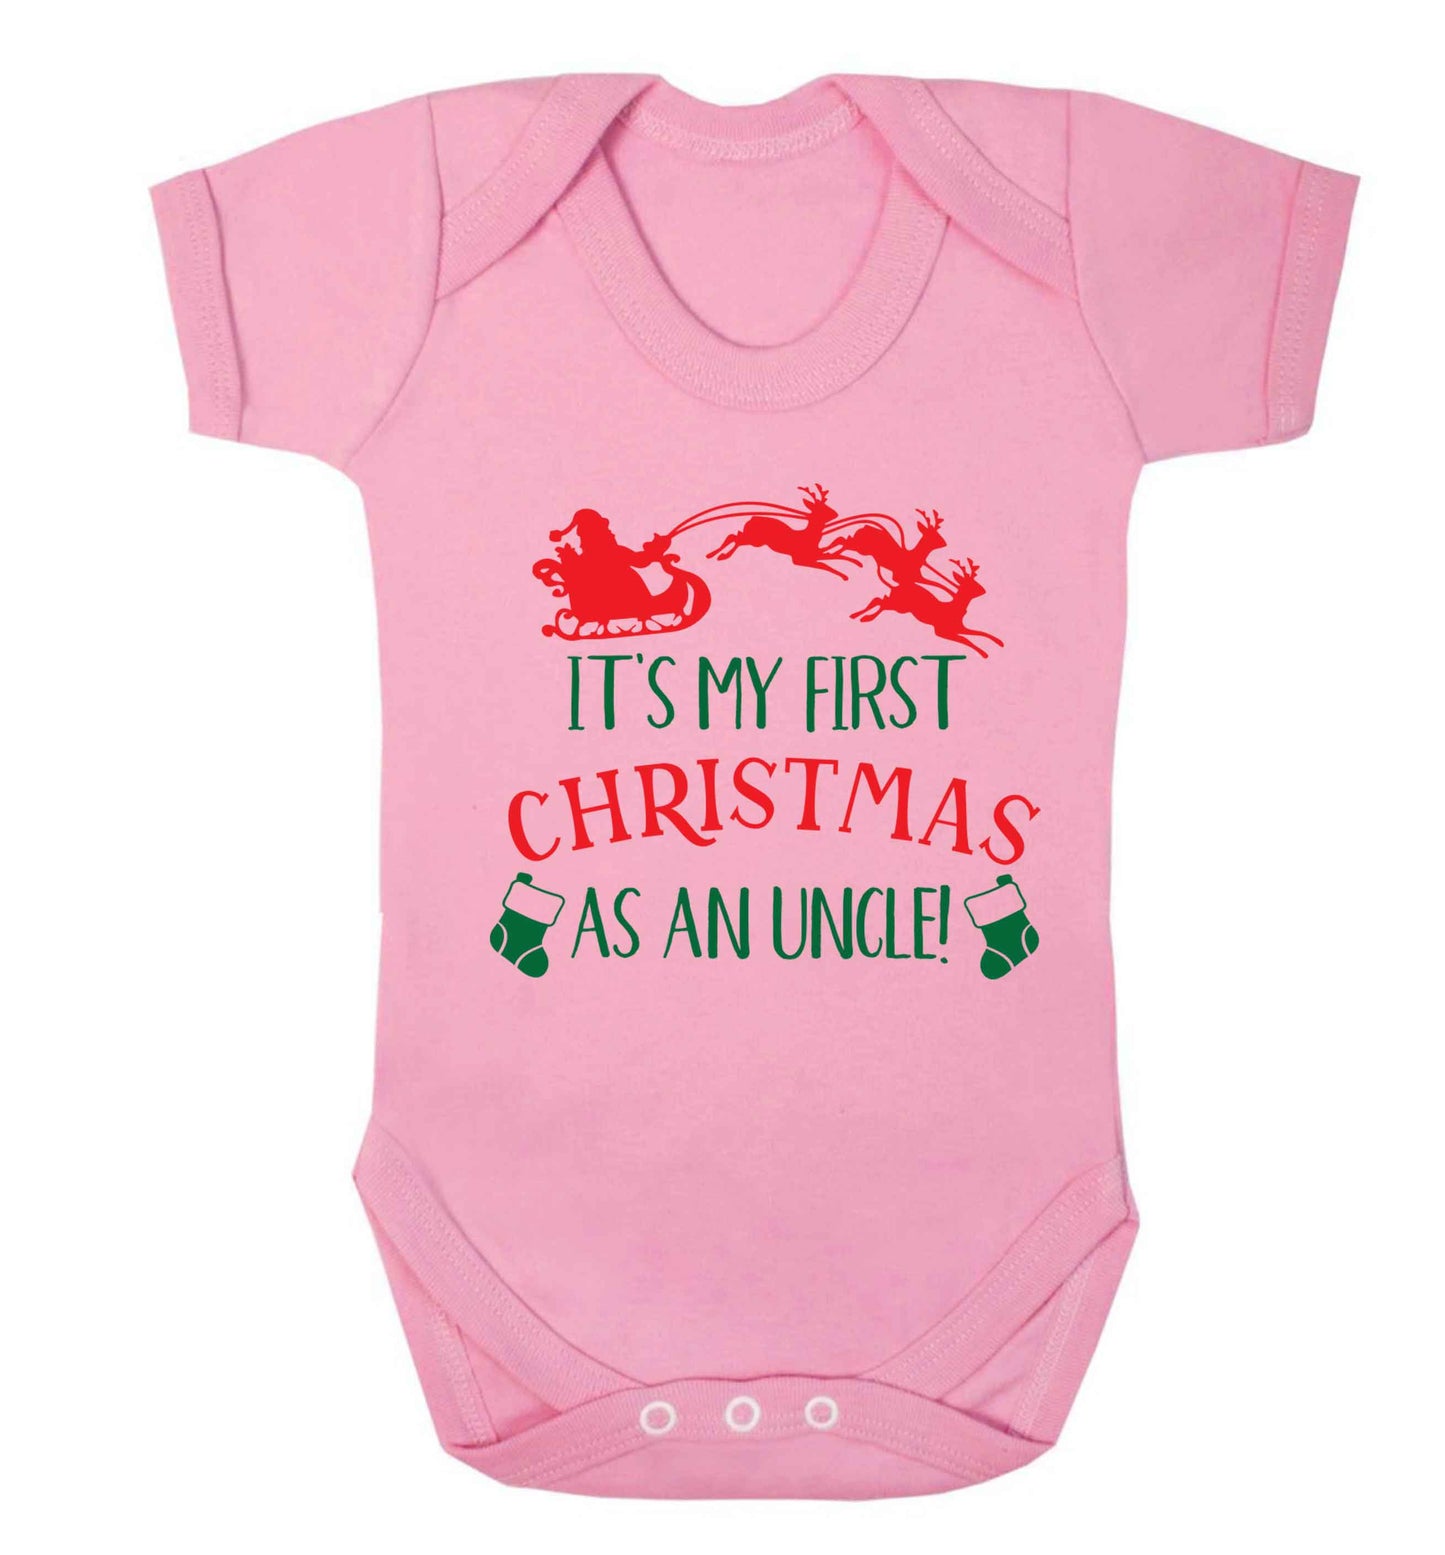 It's my first Christmas as an uncle! Baby Vest pale pink 18-24 months